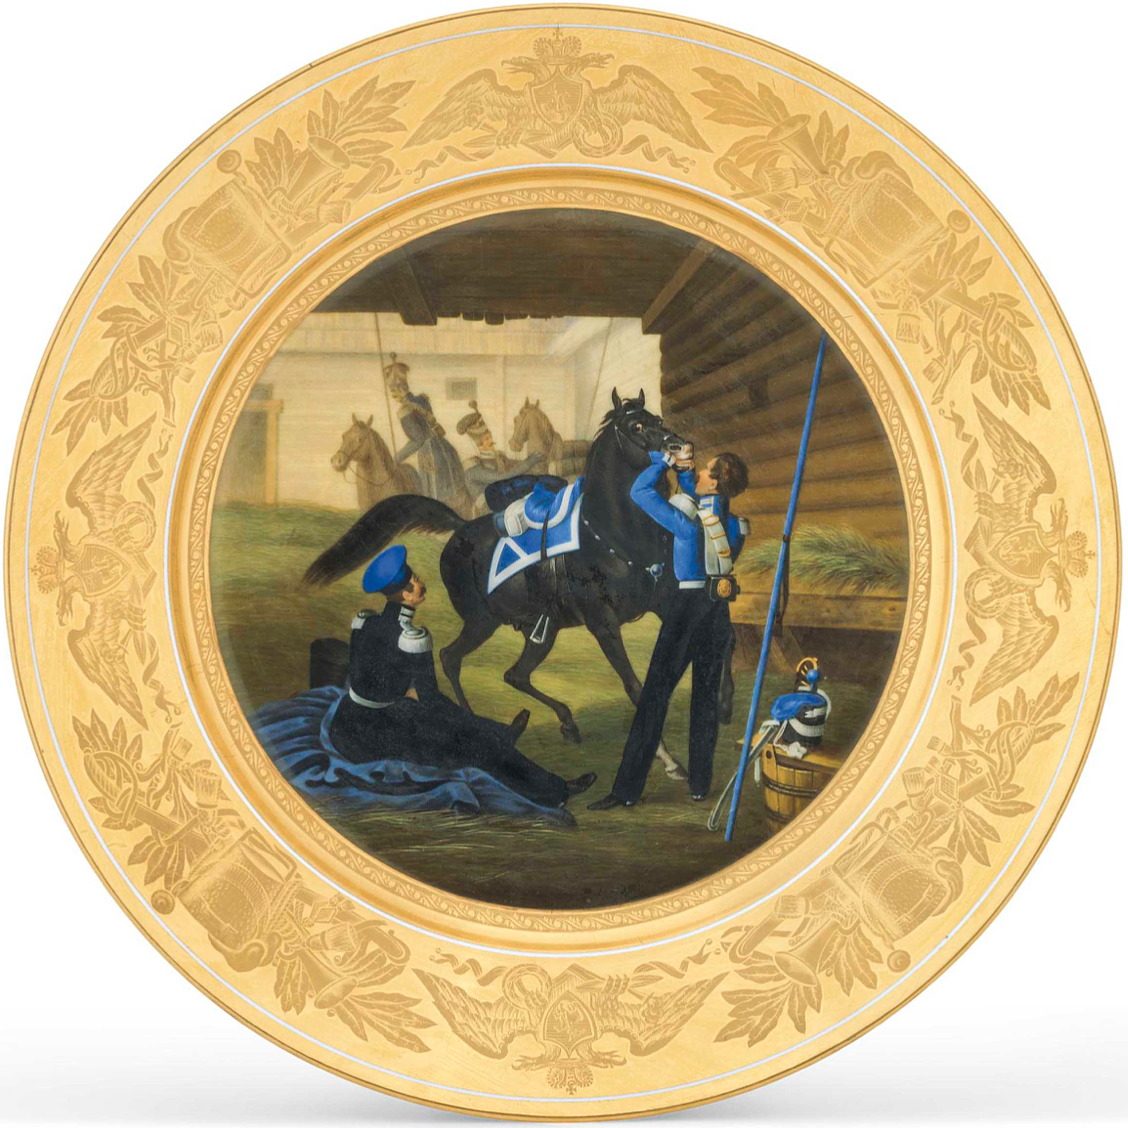 Russian Imperial Porcelain military plate depicting soldiers of Atamanski Cossack Regiment